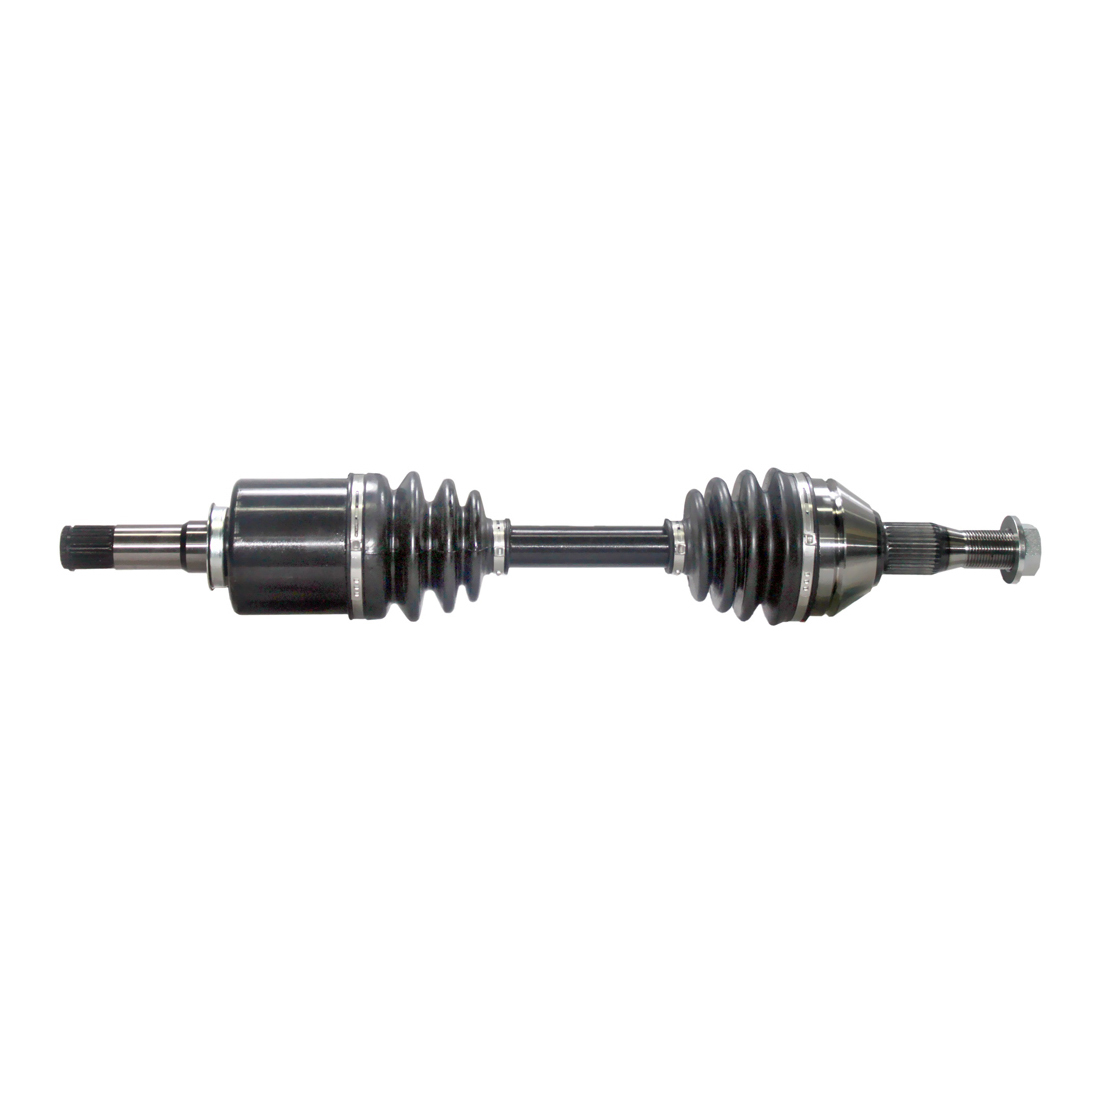 2015 Chevrolet impala limited drive axle front 